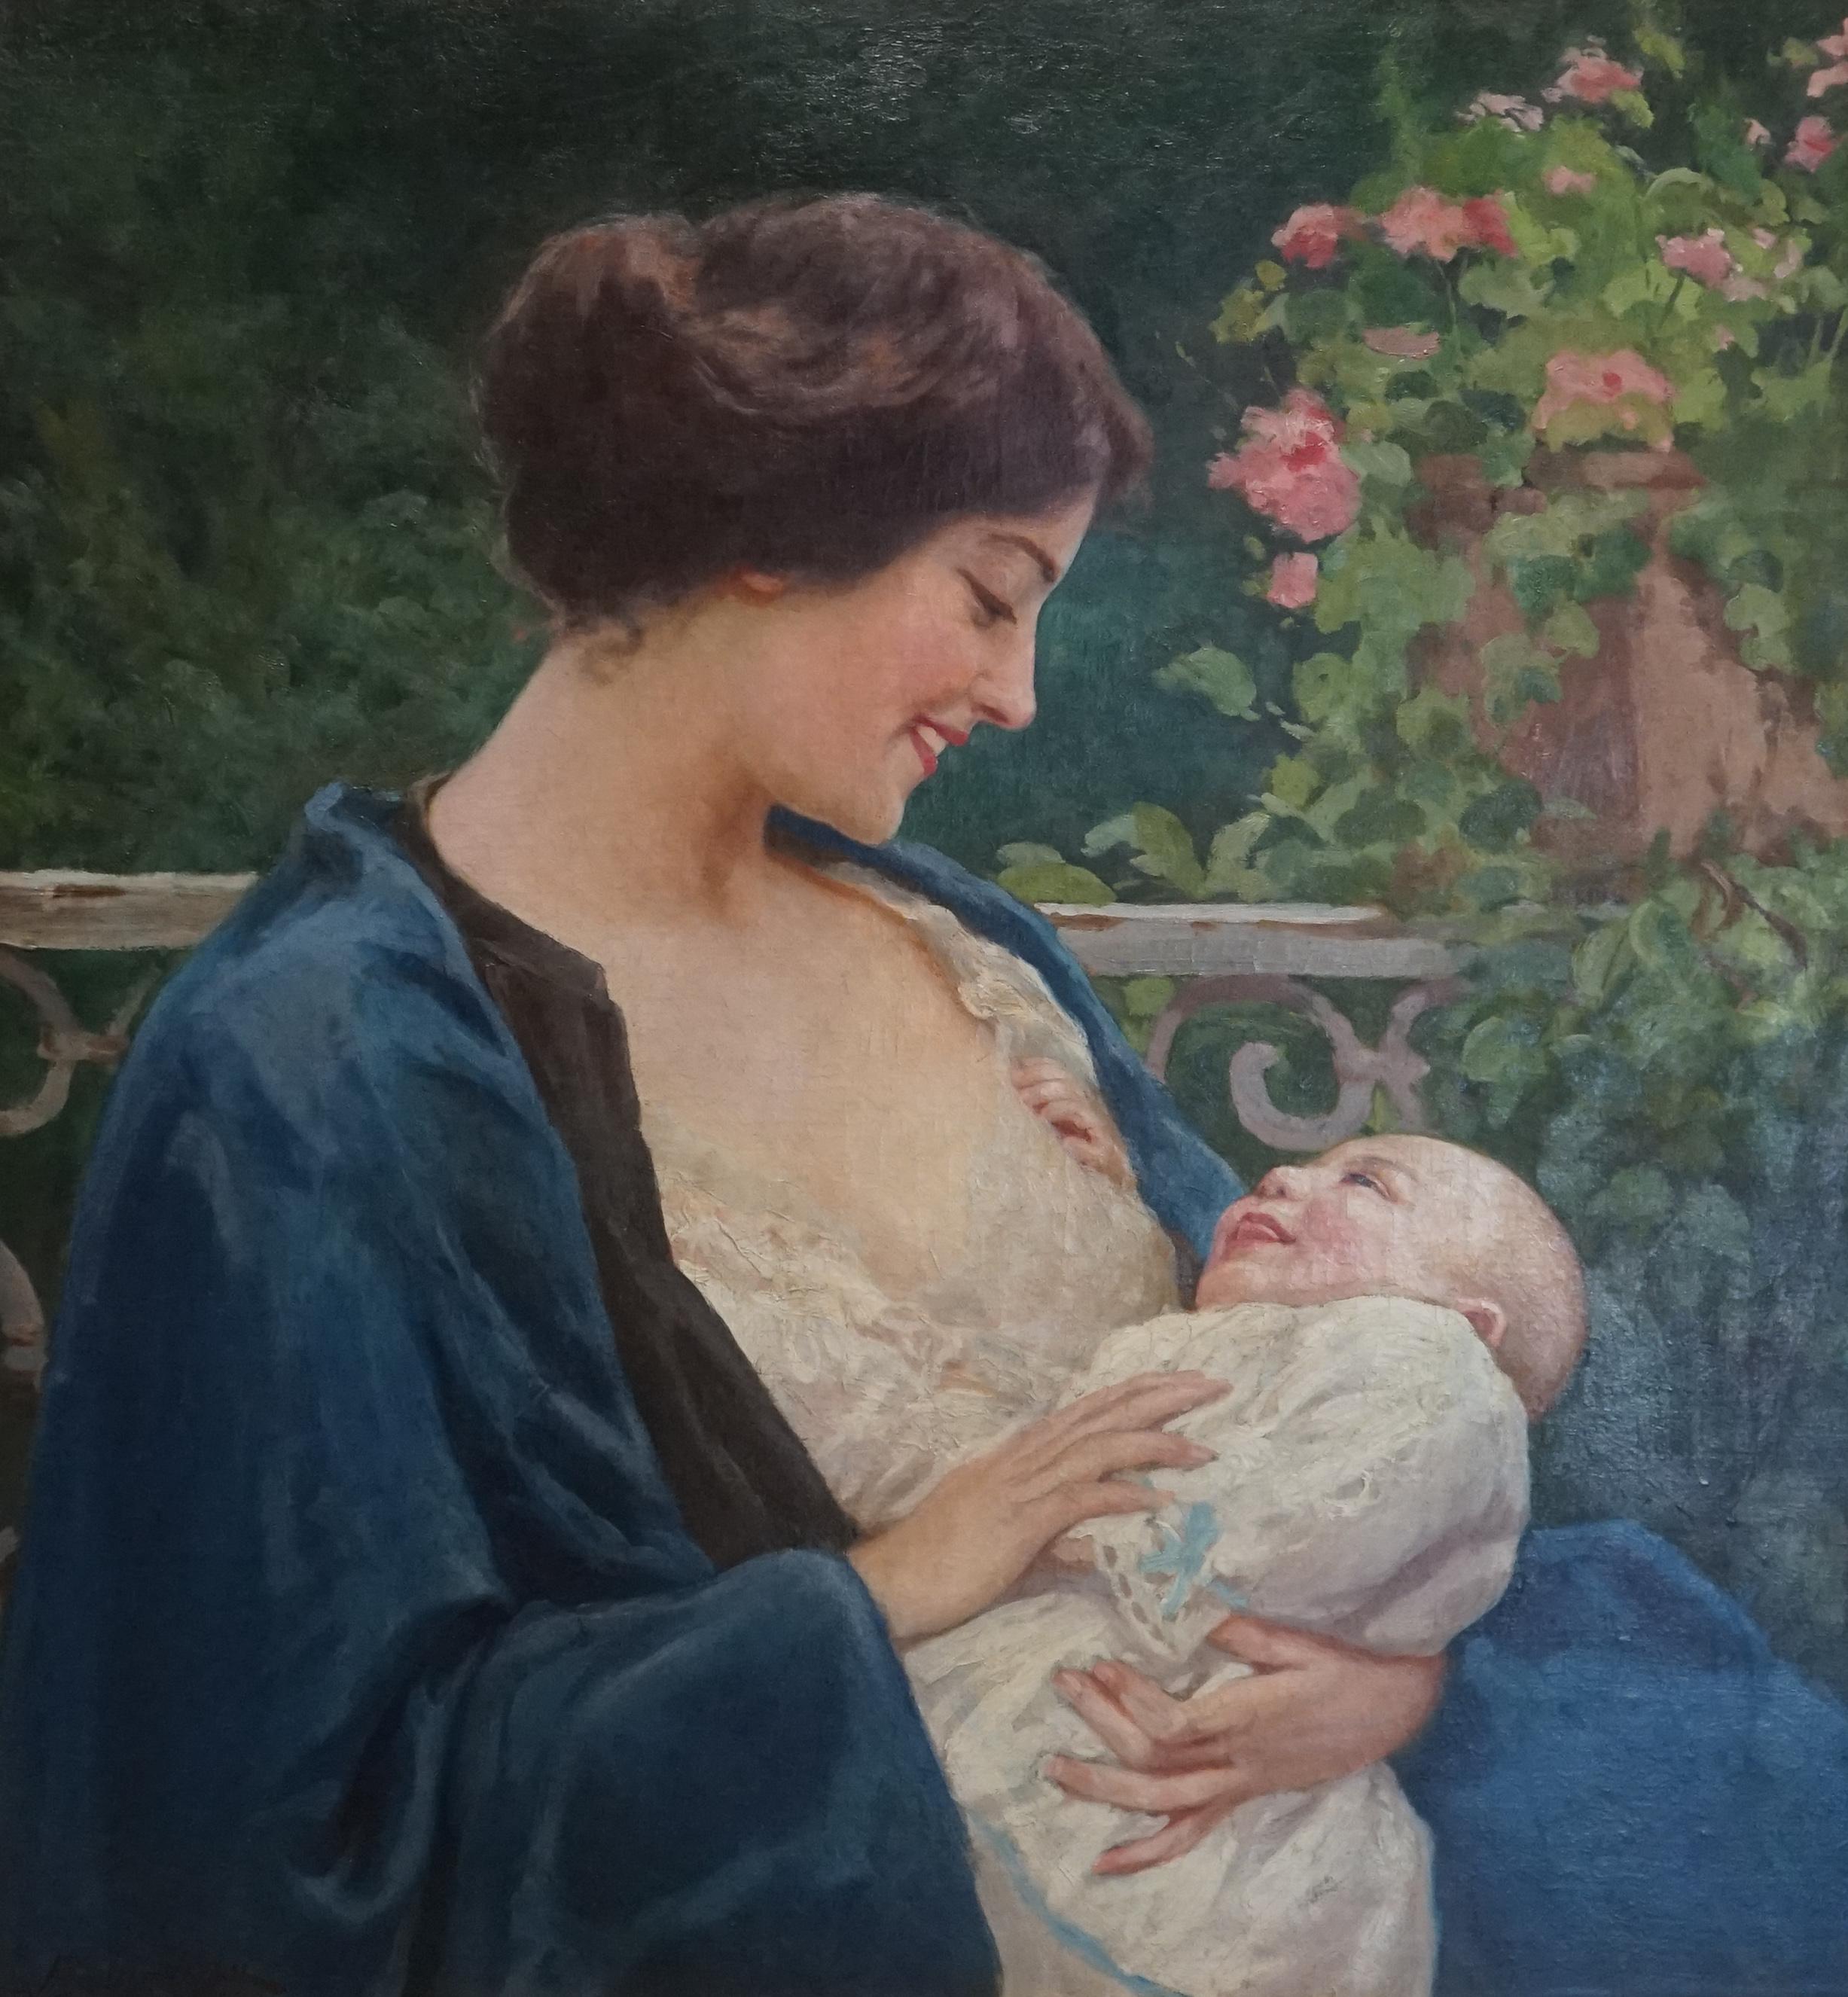 ITALIAN IMPRESSIONIST MOTHER & CHILD IN GARDEN - Painting by Adolfo Belimbau